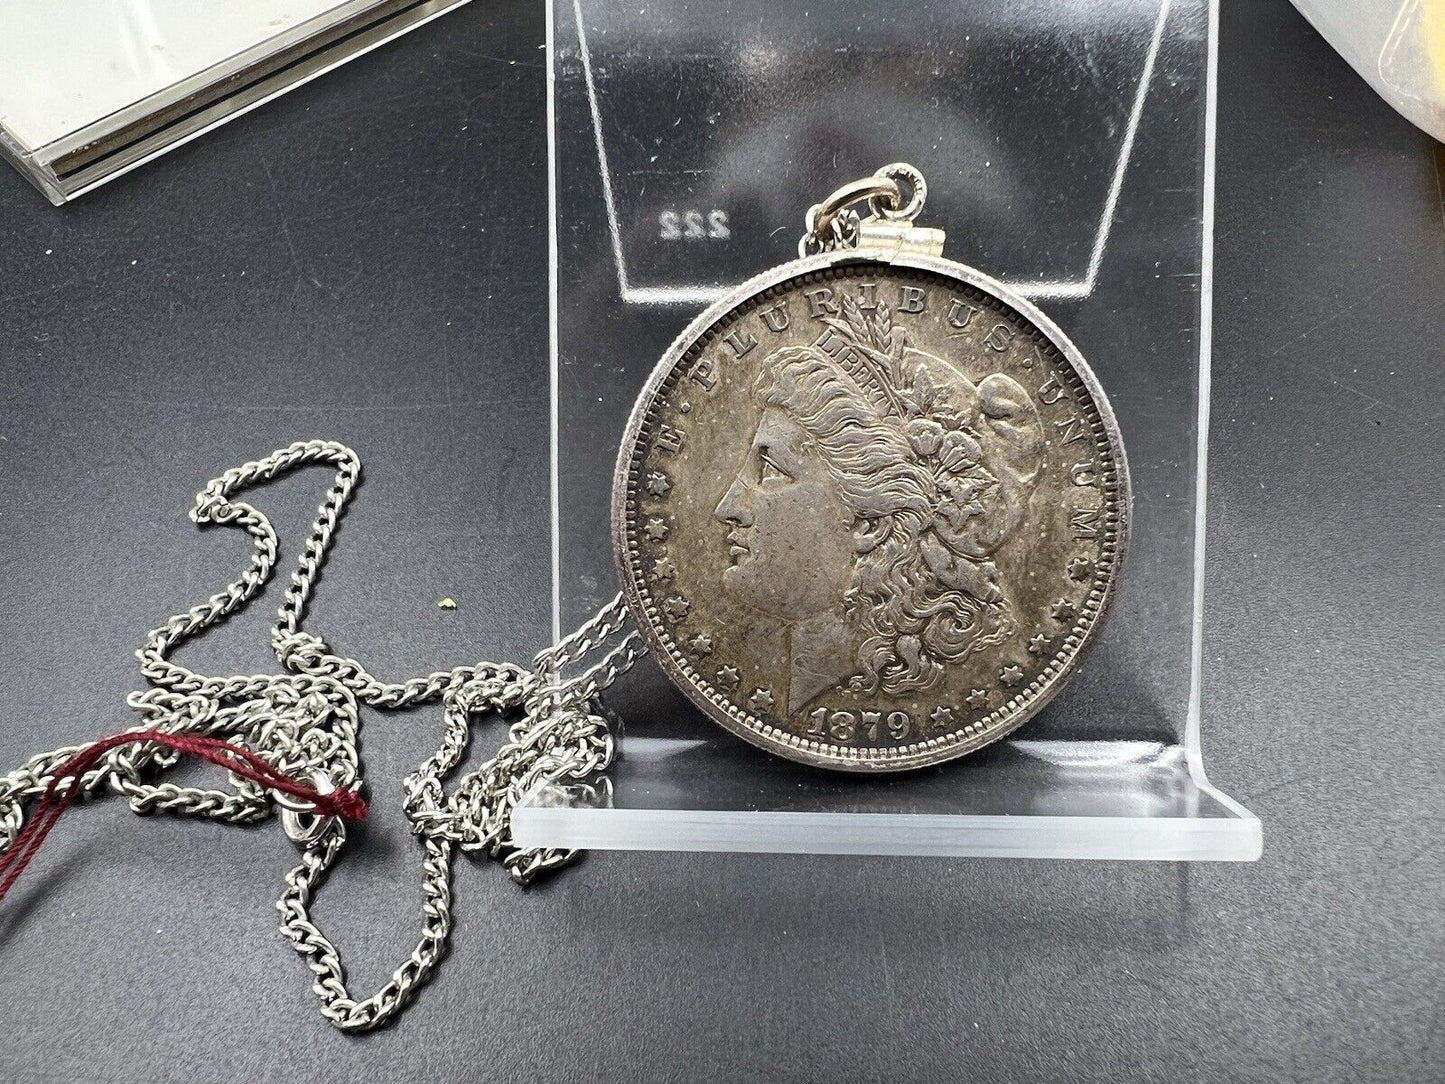 1879 $1 Morgan Silver Dollar Coin VF in Sterling Silver Bezel with metal Chain